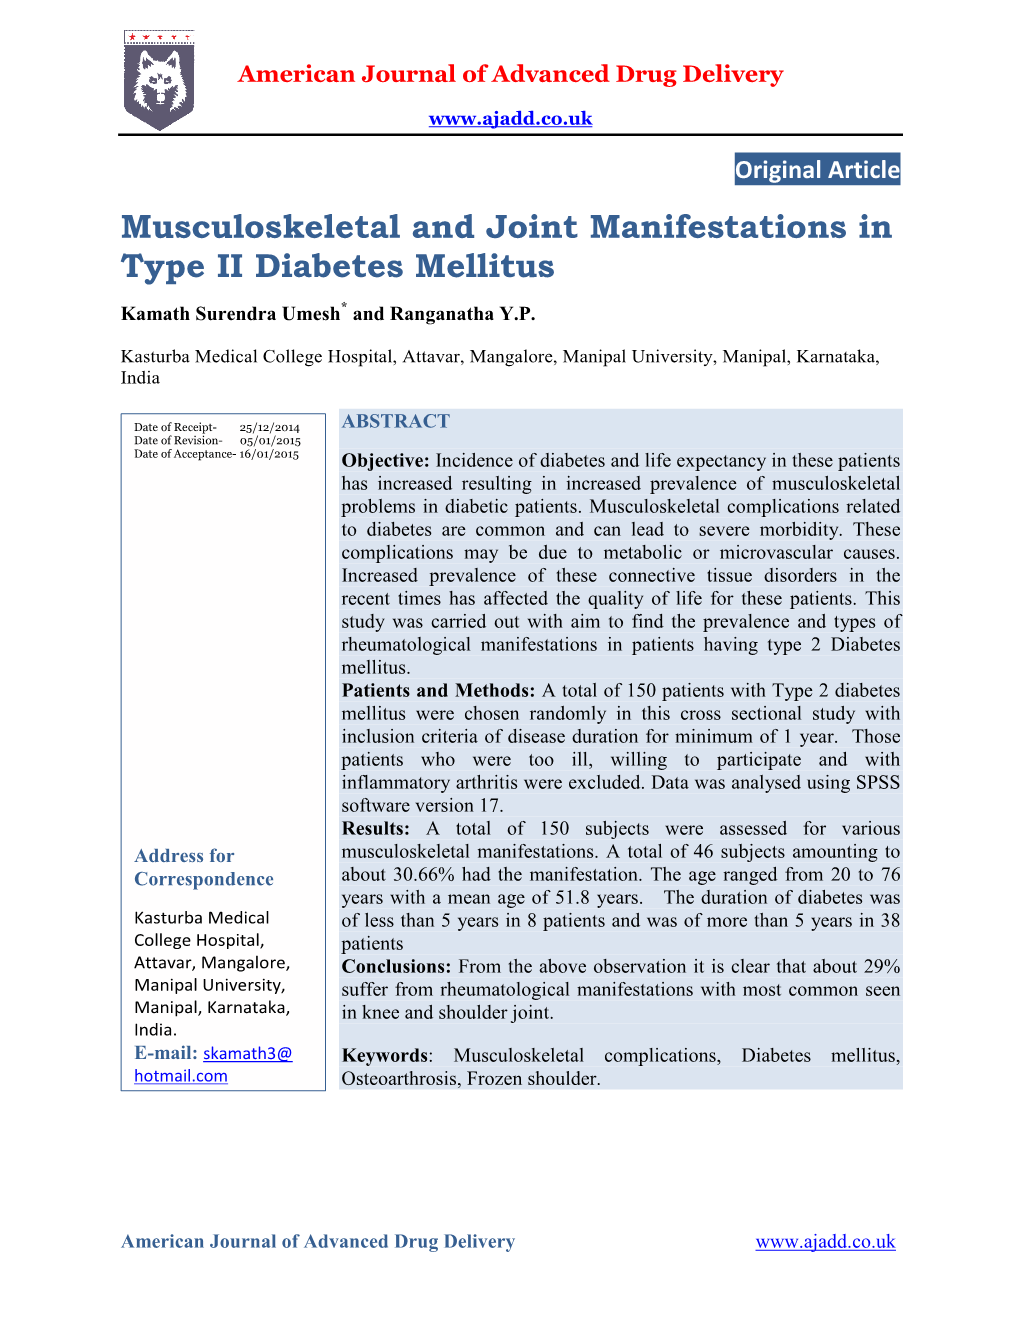 Musculoskeletal and Joint Manifestations in Type II Diabetes Mellitus Kamath Surendra Umesh* and Ranganatha Y.P